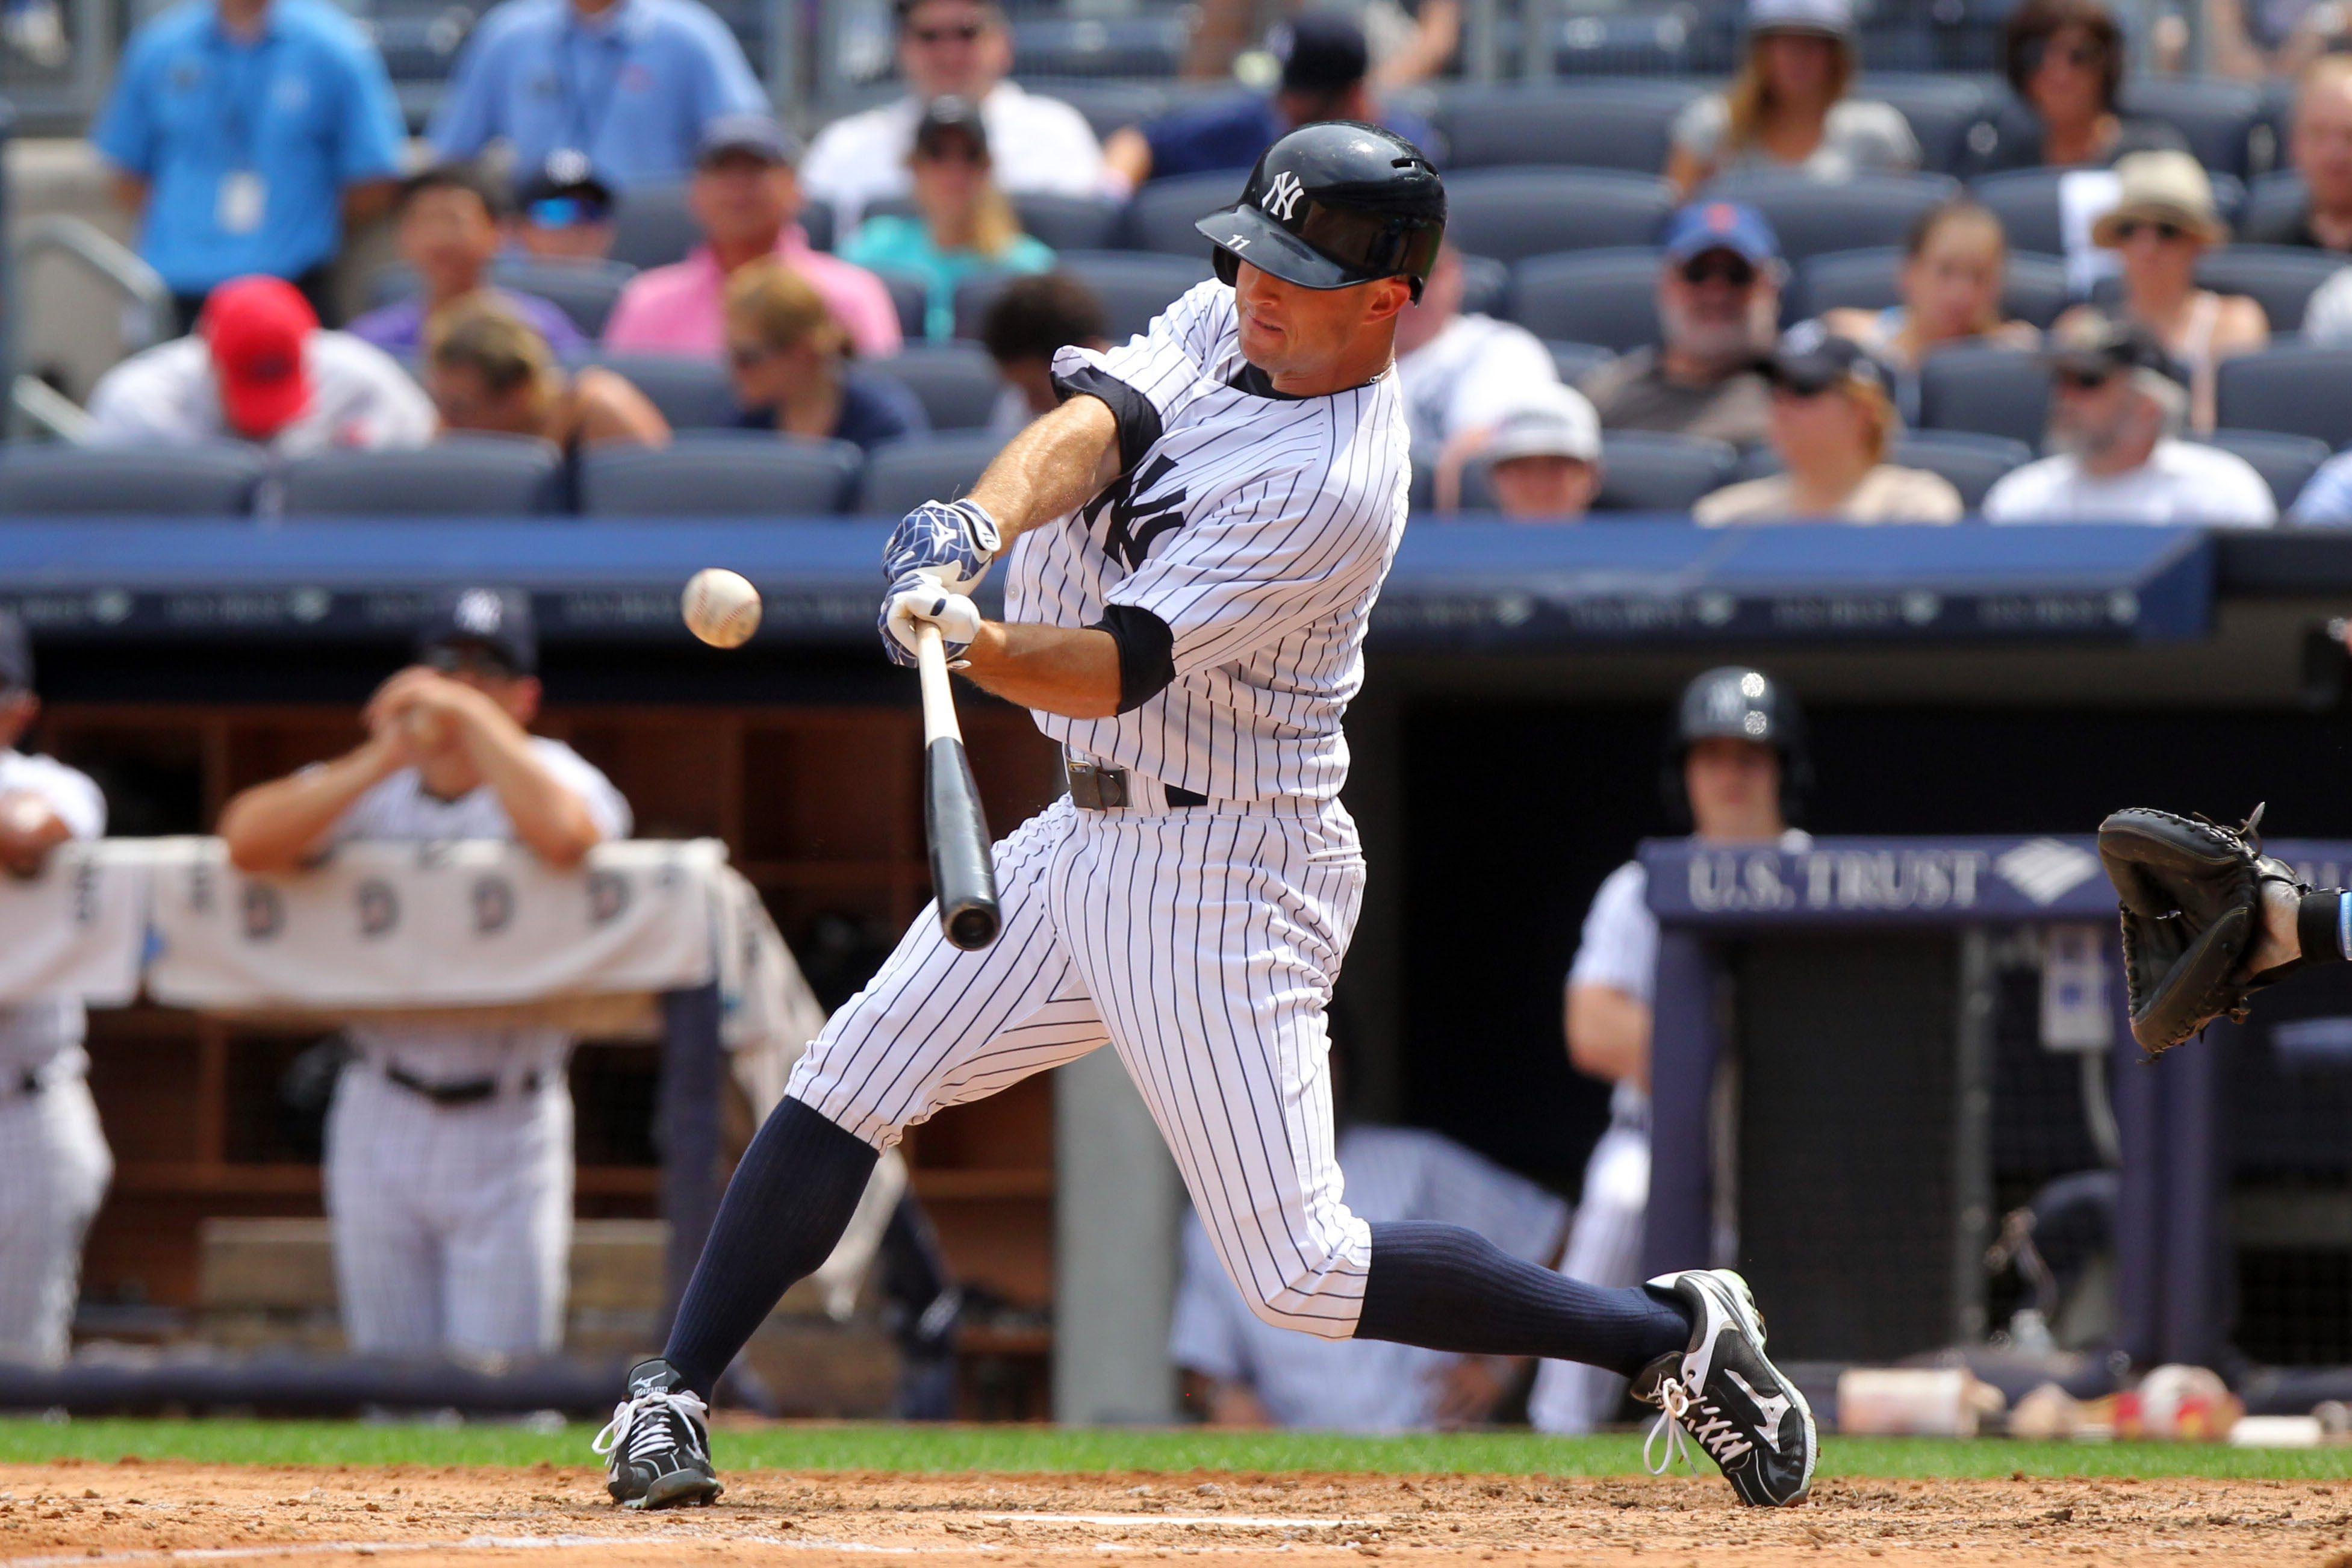 Brett Gardner's quietly great year is a harbinger of things to